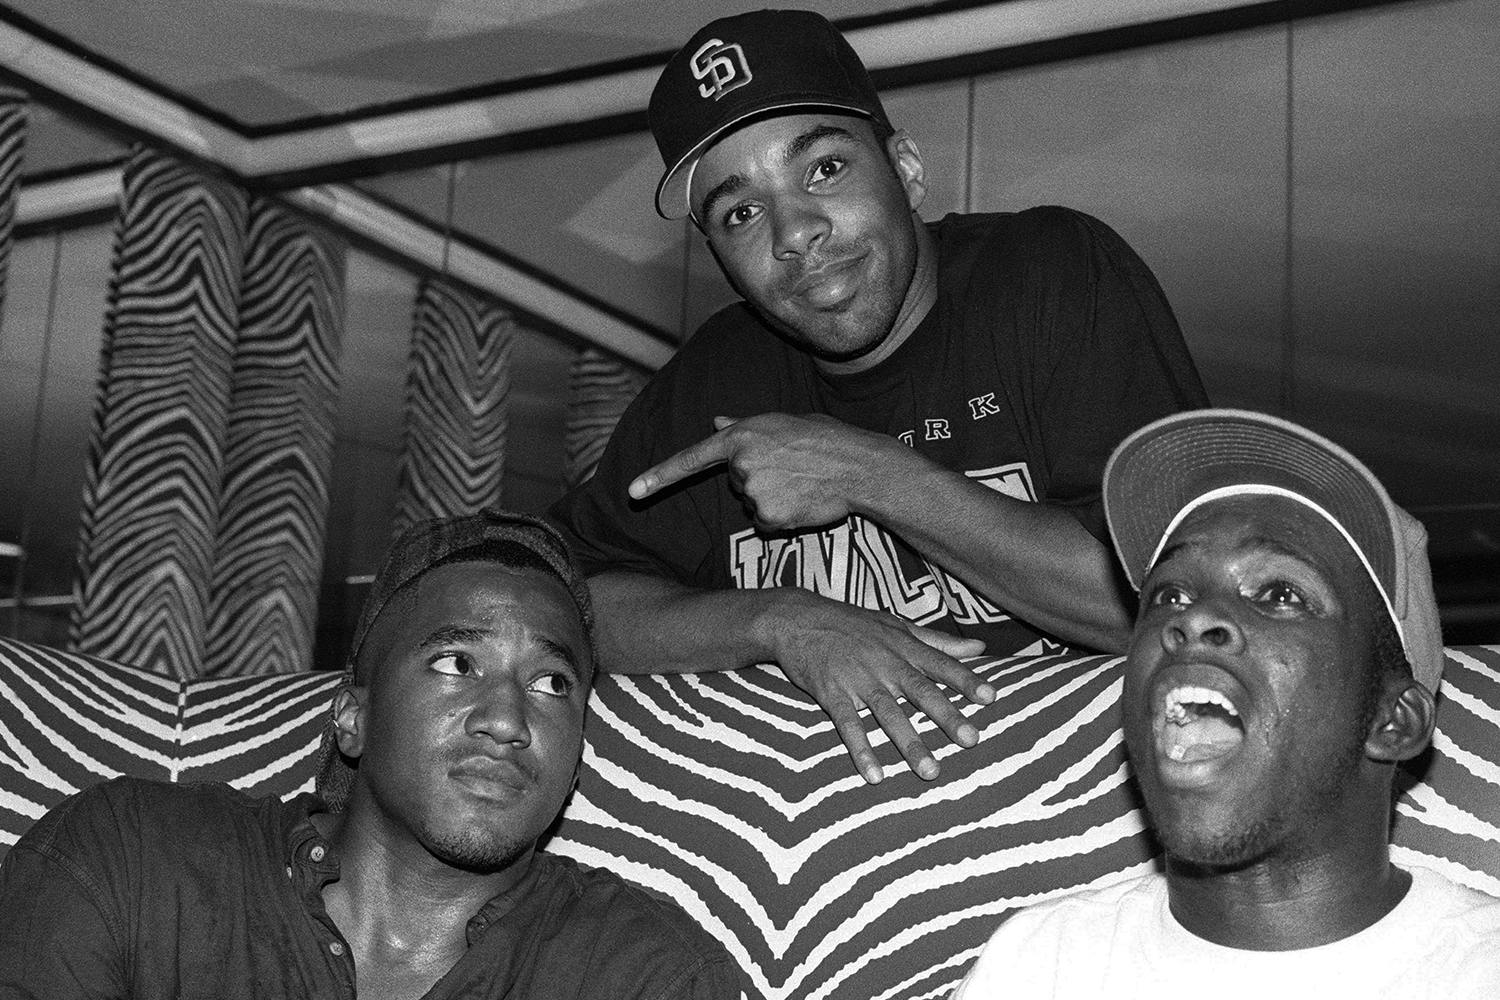 Actor Allen Payne and A Tribe Called Quest attend an album-release party for A Tribe Called Quest's 